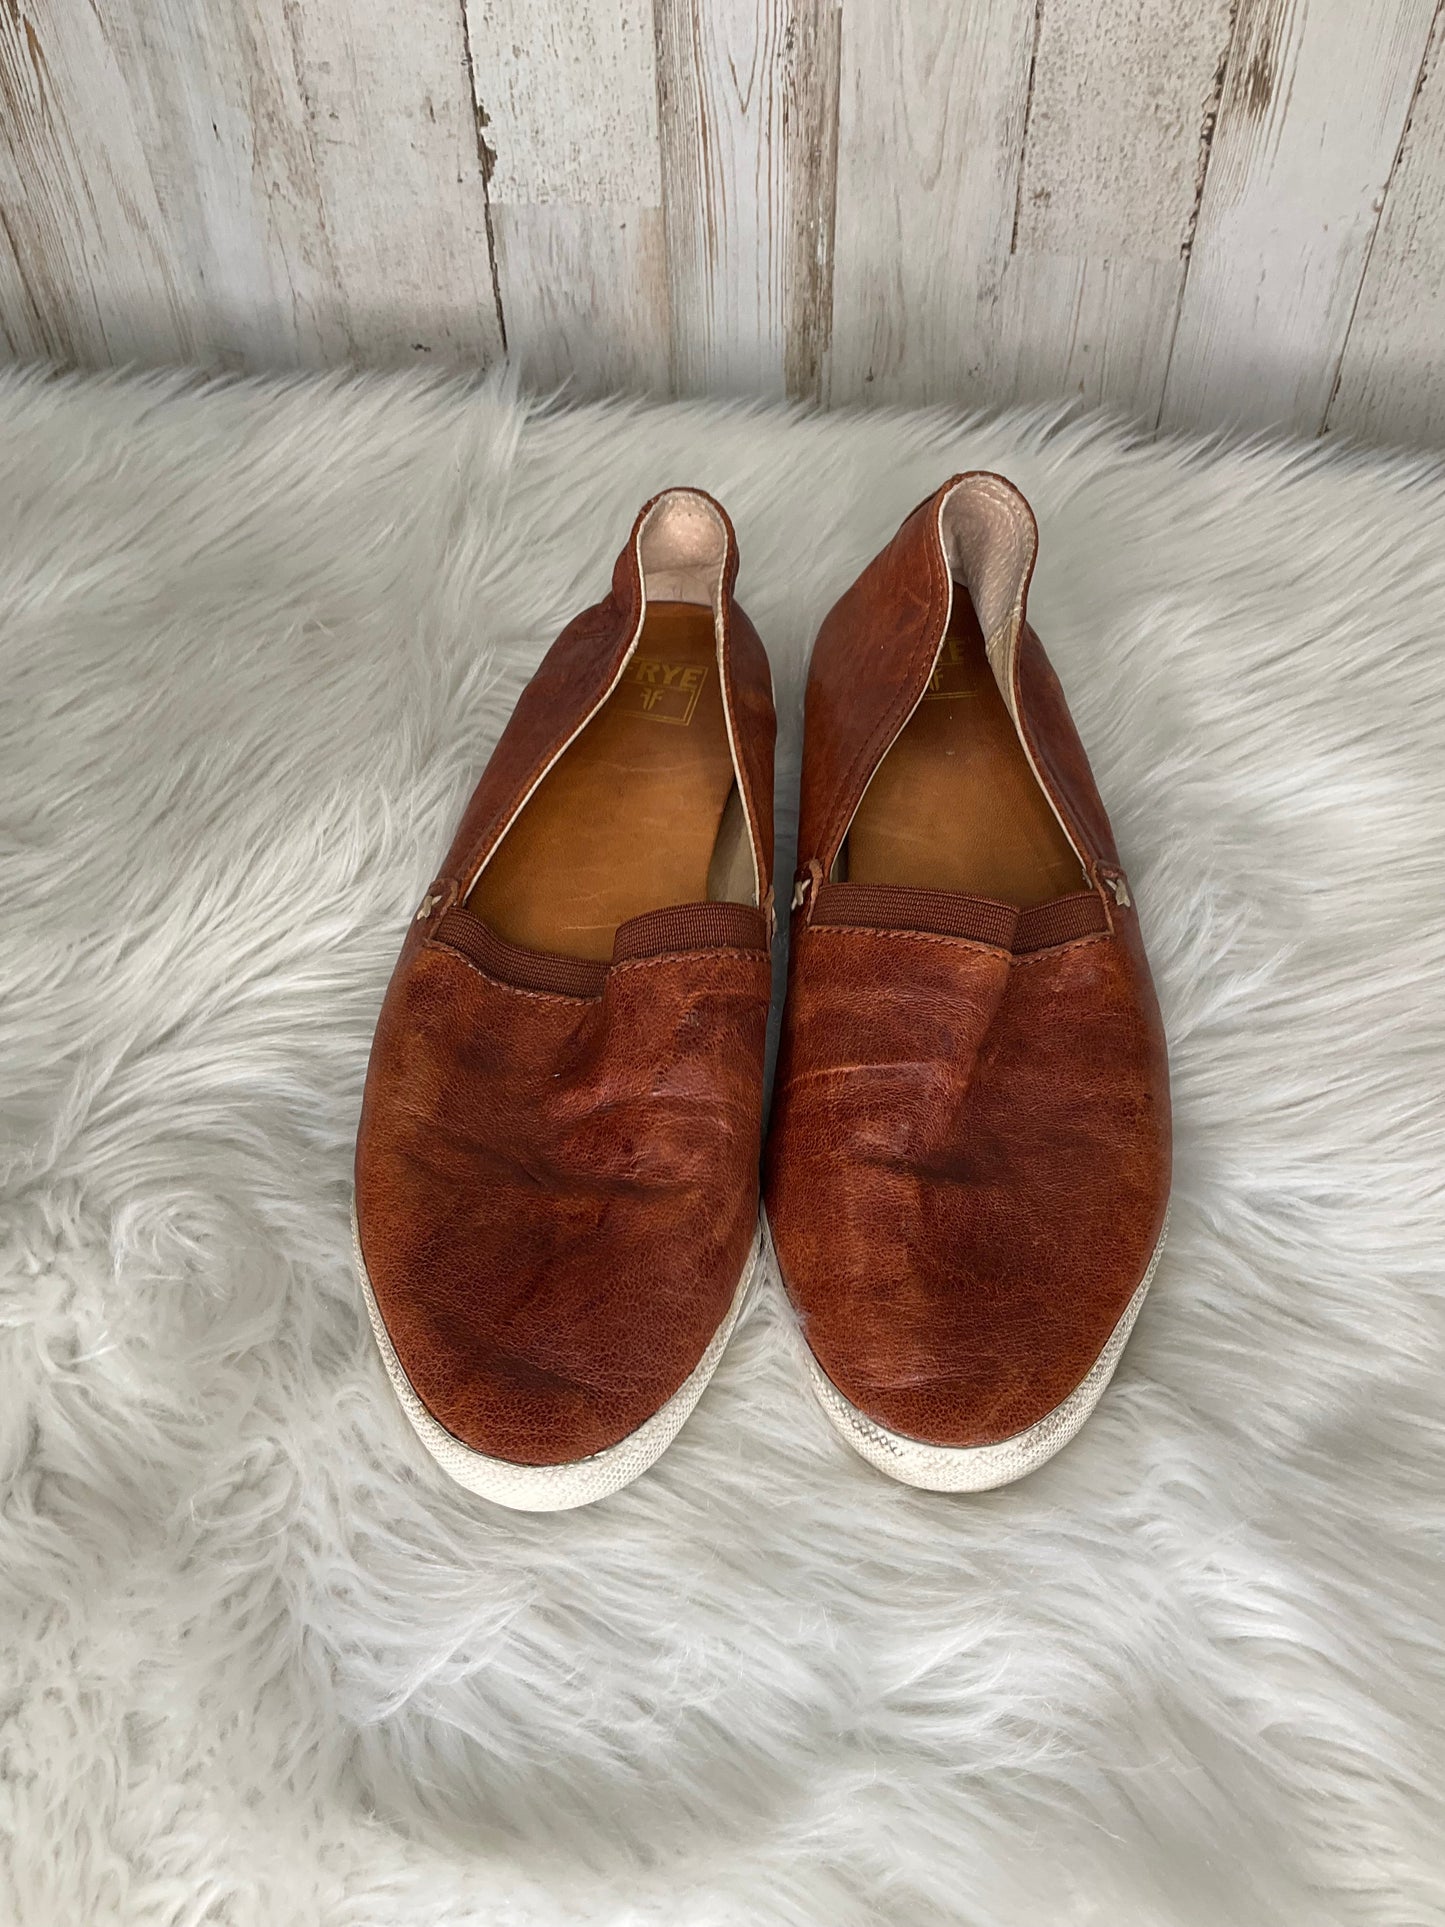 Brown Shoes Flats Frye, Size 7.5